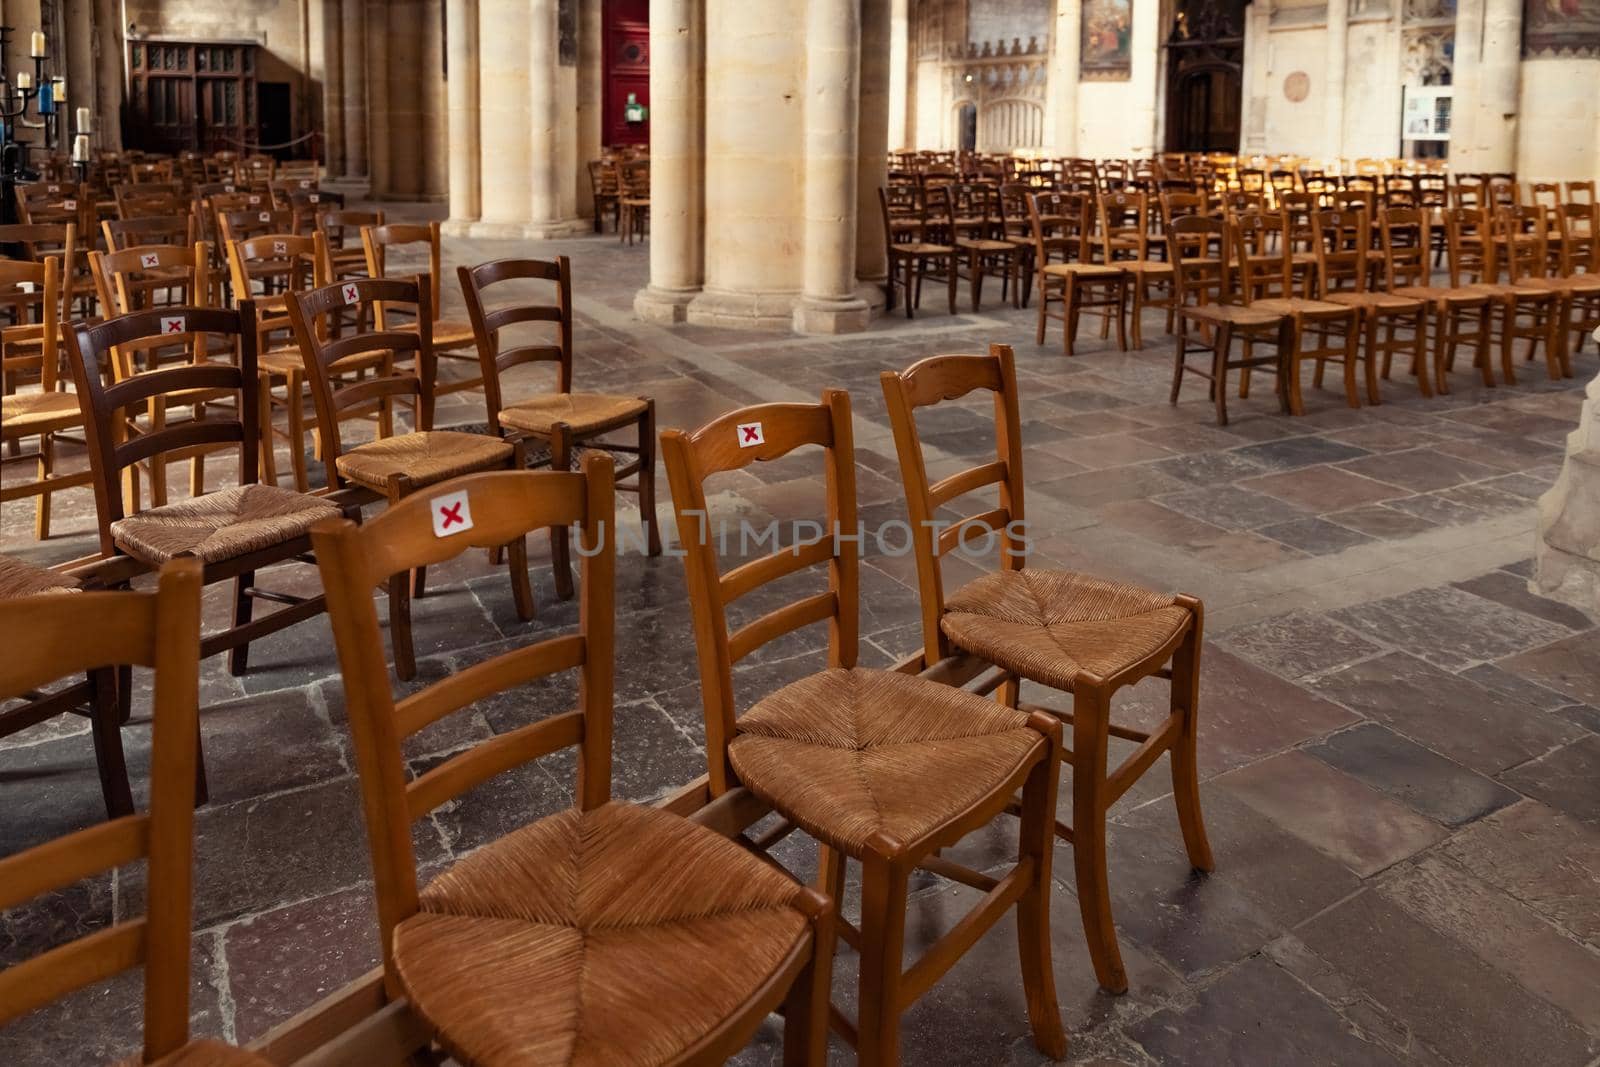 A church with empty seats during the coronavirus pandemic Covid-19.